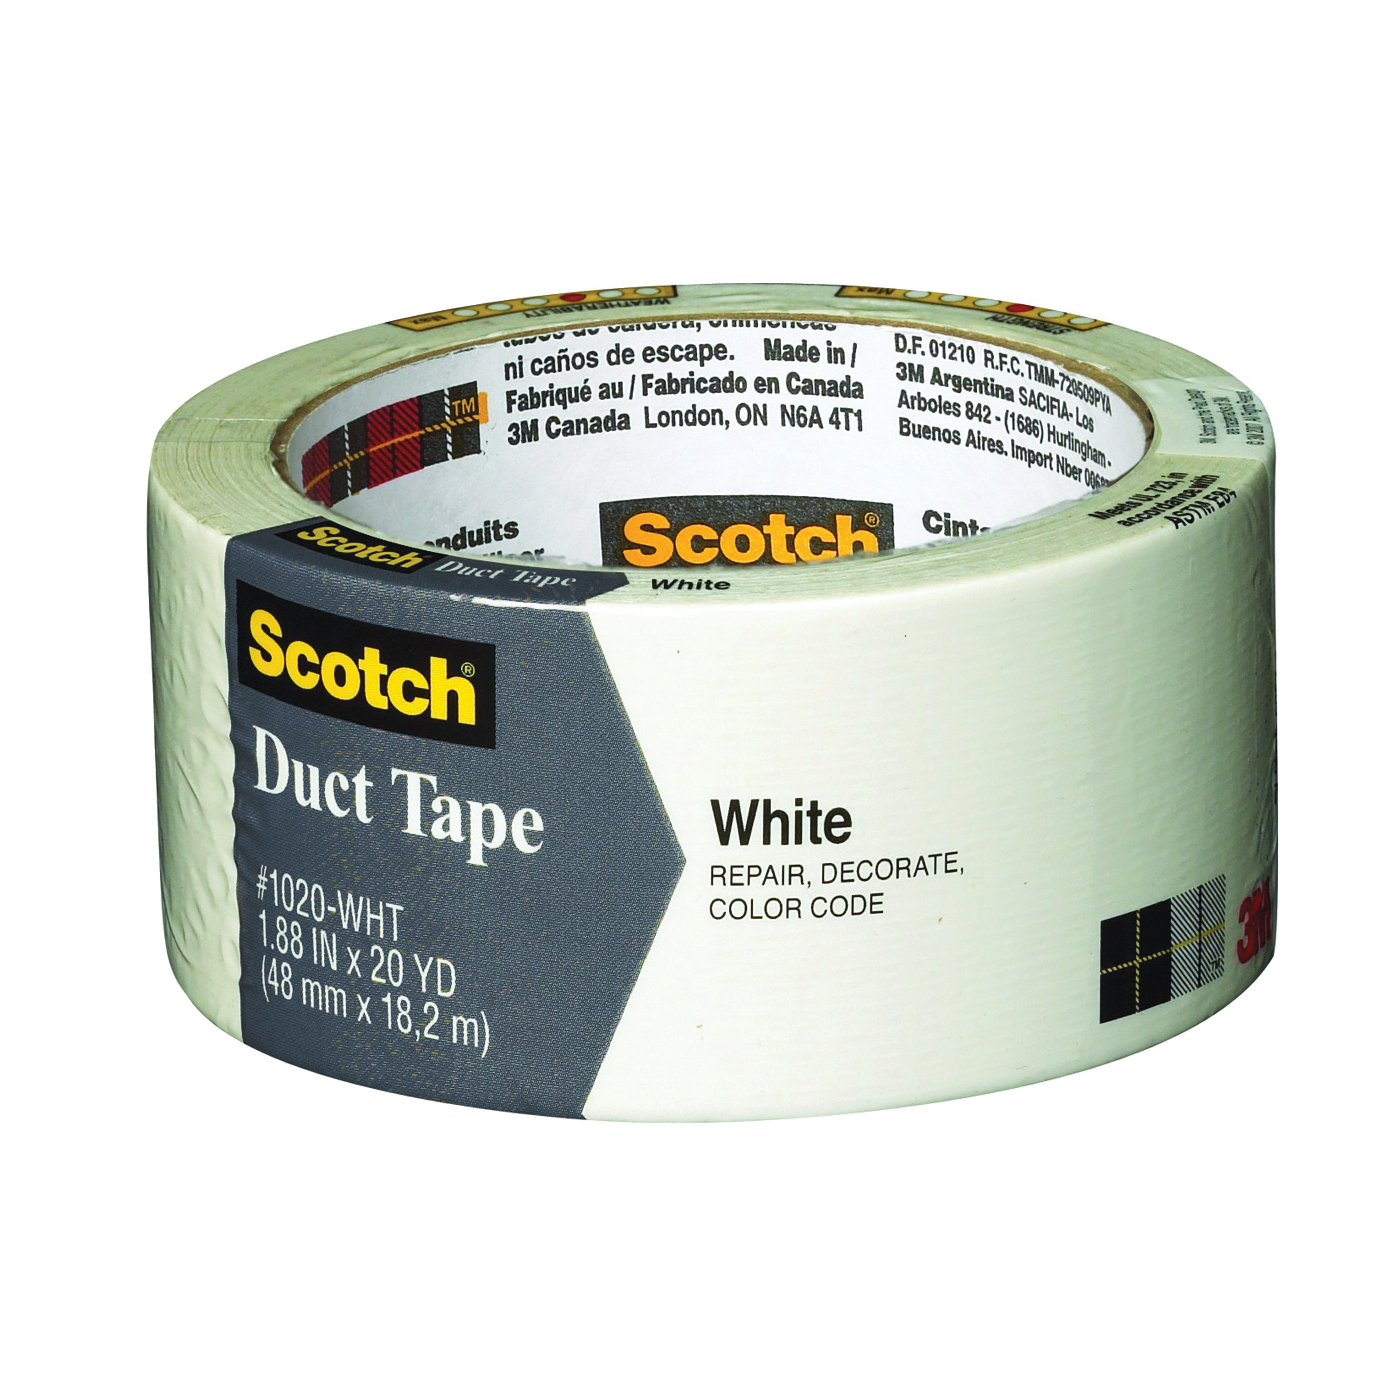 3920-WH Duct Tape, 20 yd L, 1.88 in W, White